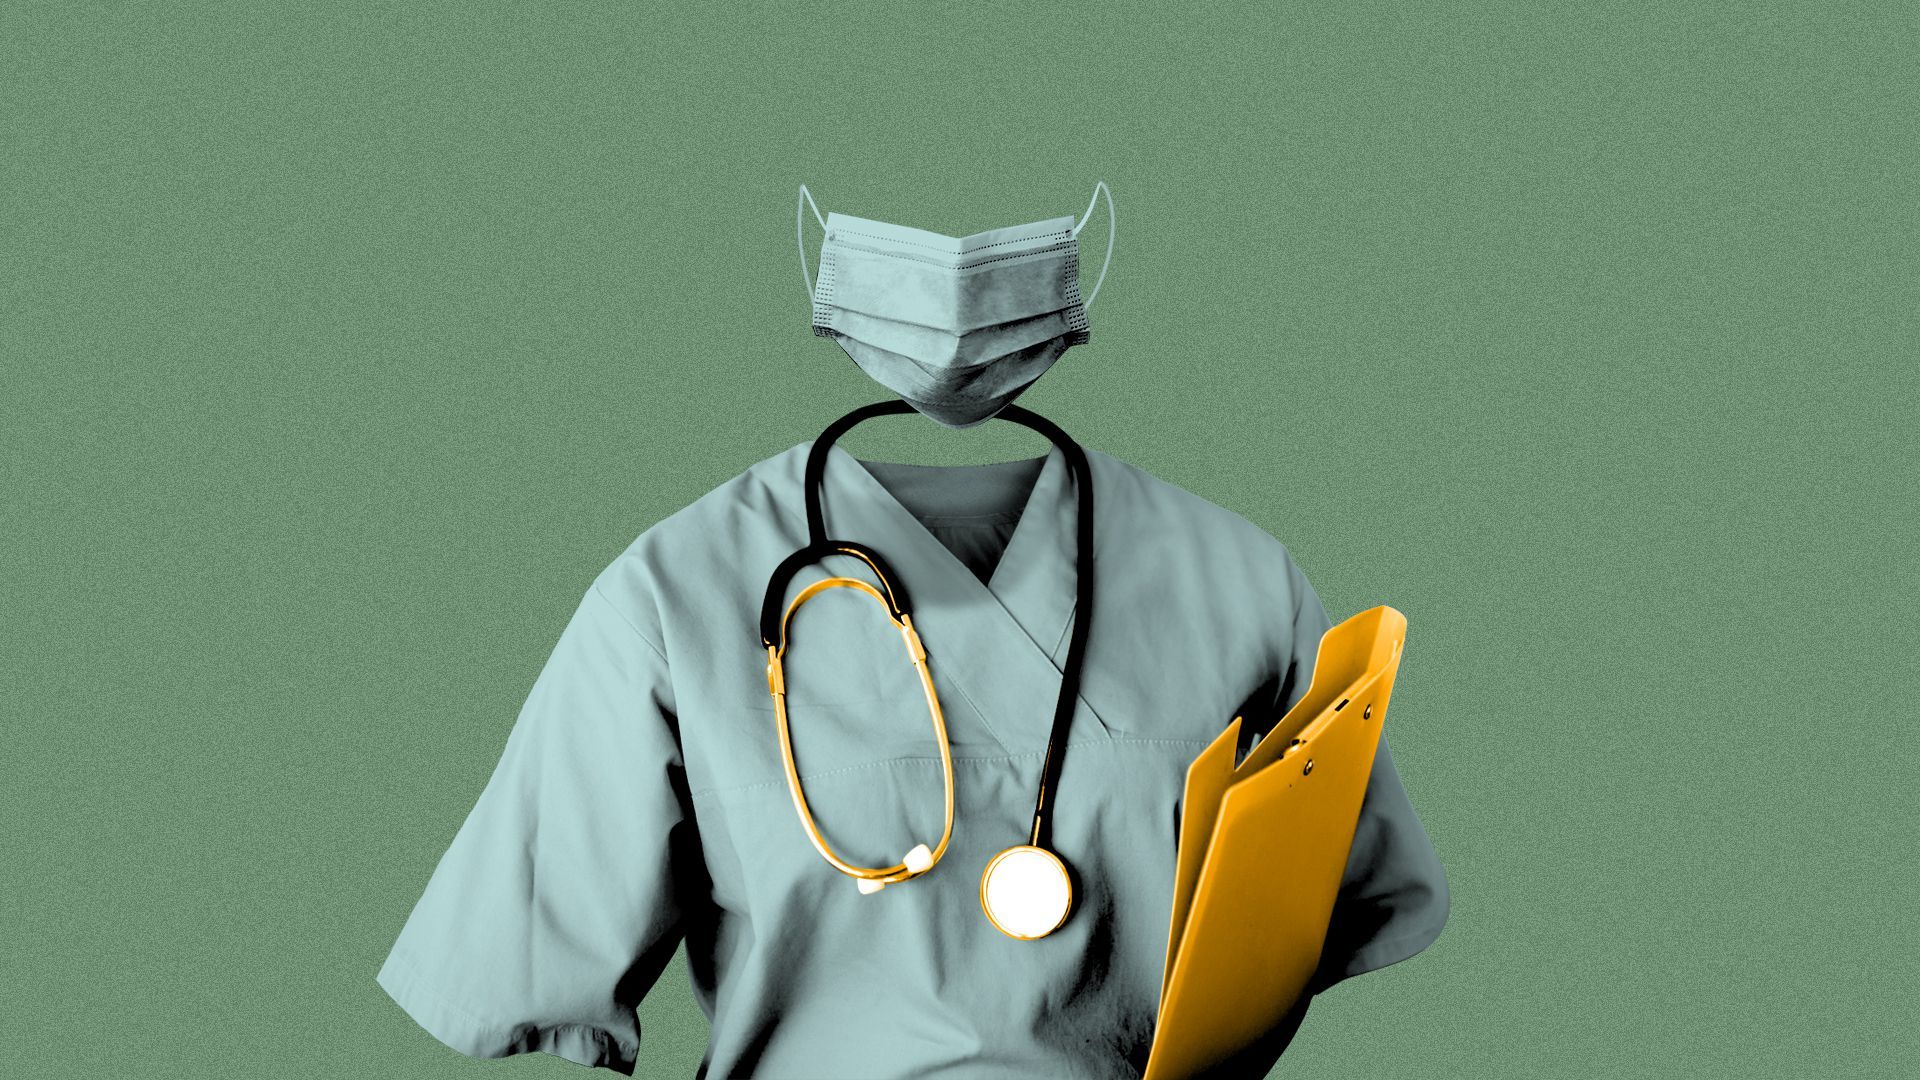 Illustration of a nurse's scrubs, stethoscope and mask, standing with no nurse inside them.